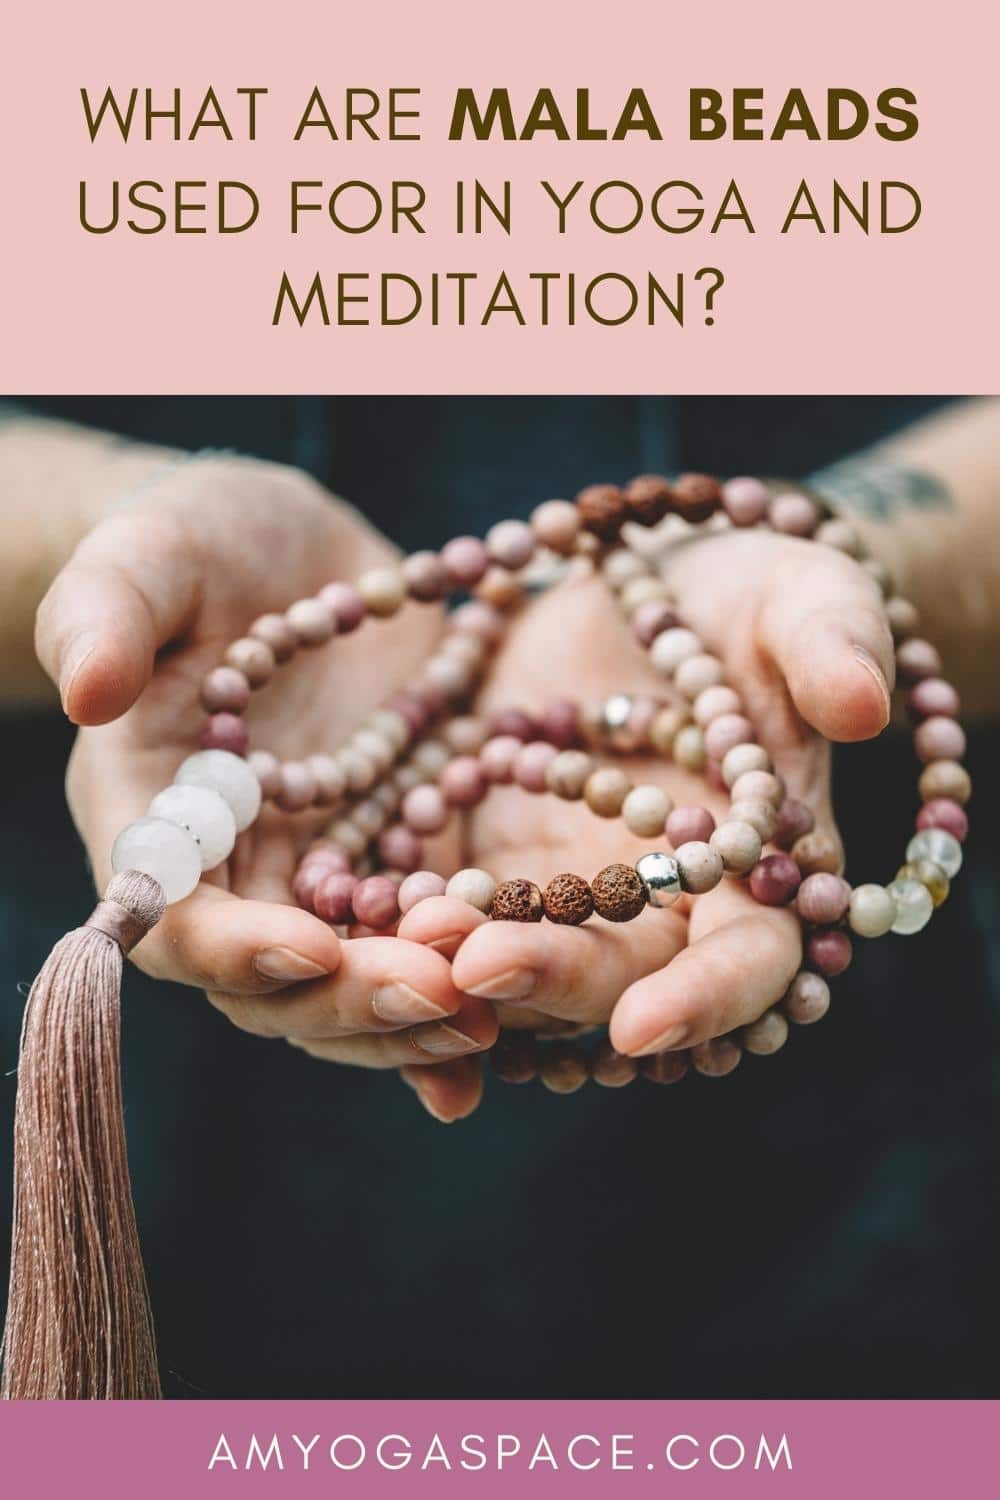 What Are Mala Beads Used For In Yoga and Meditation?